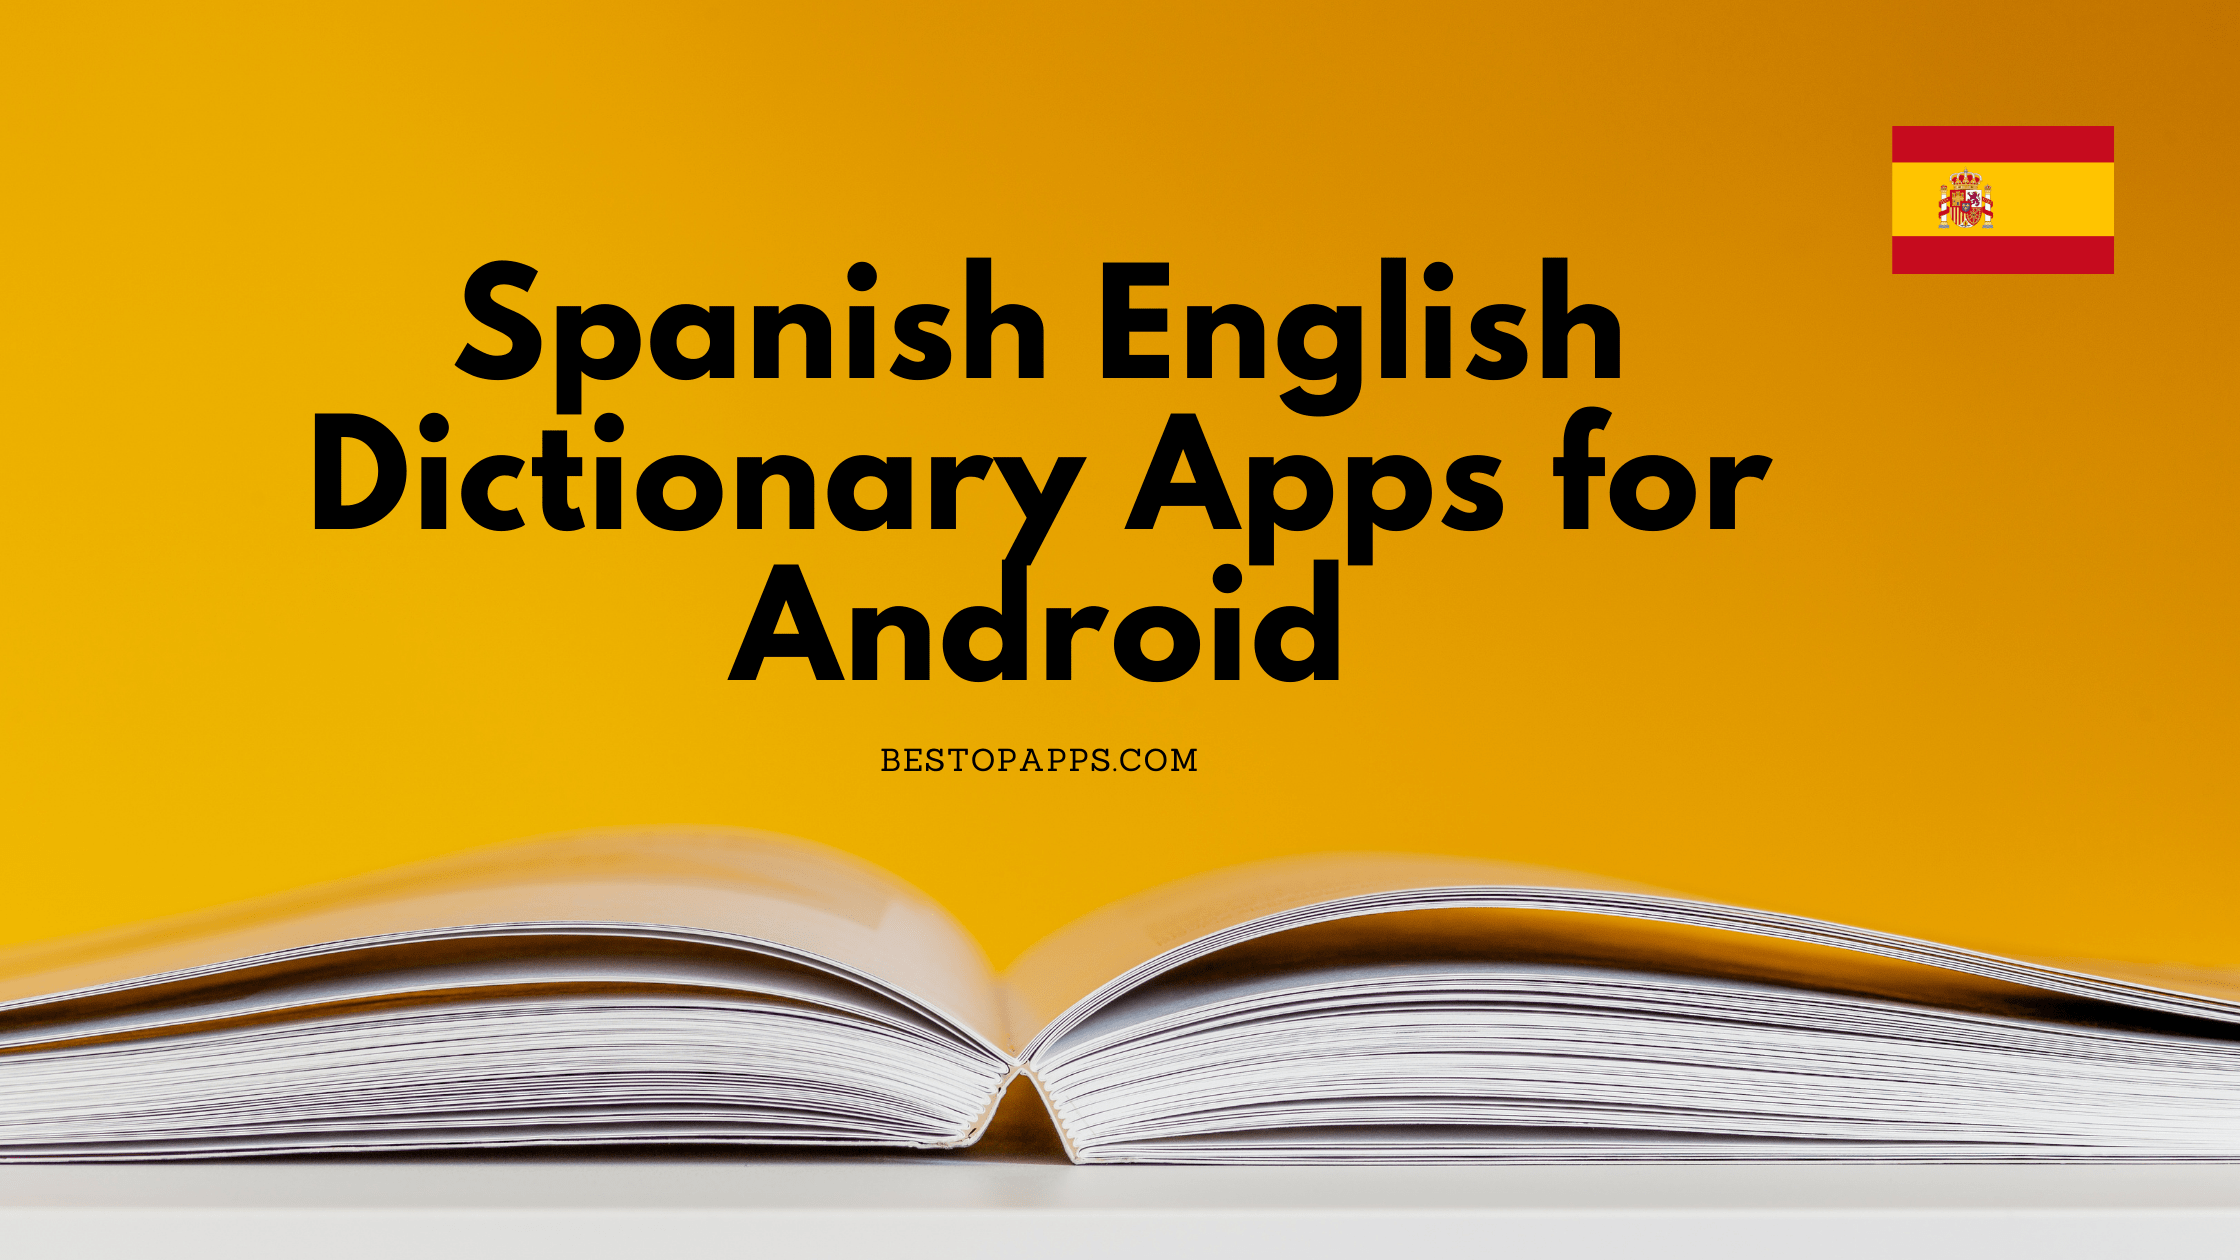 Spanish English Dictionary Apps for Android